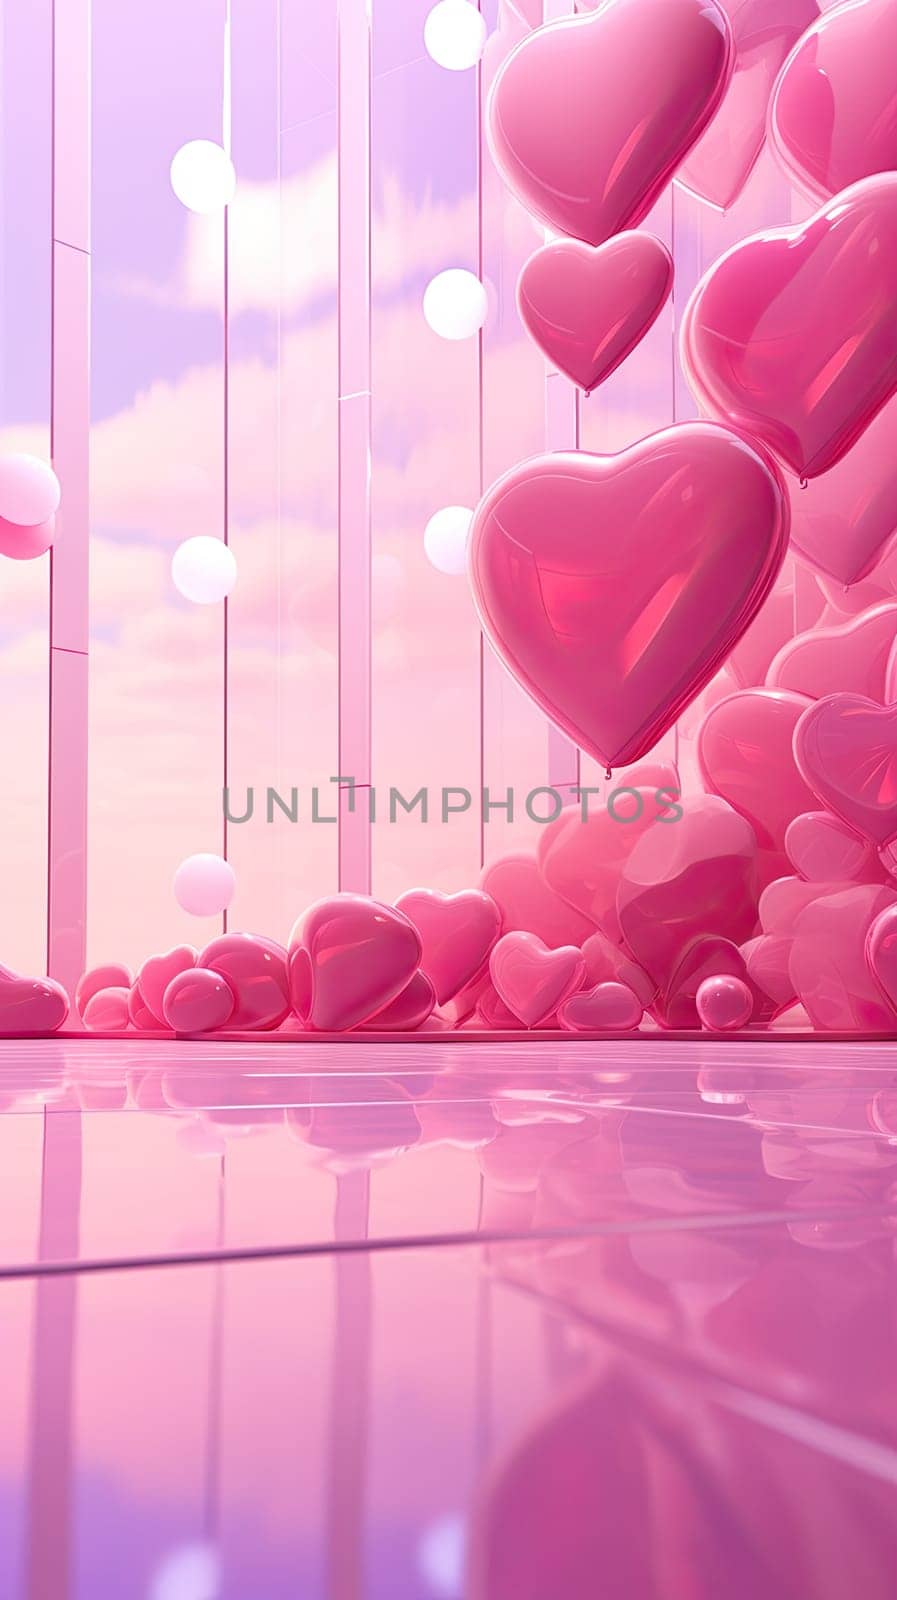 Abstract valentine vertical background illustration with pink hearts hanging indoors with copy space.